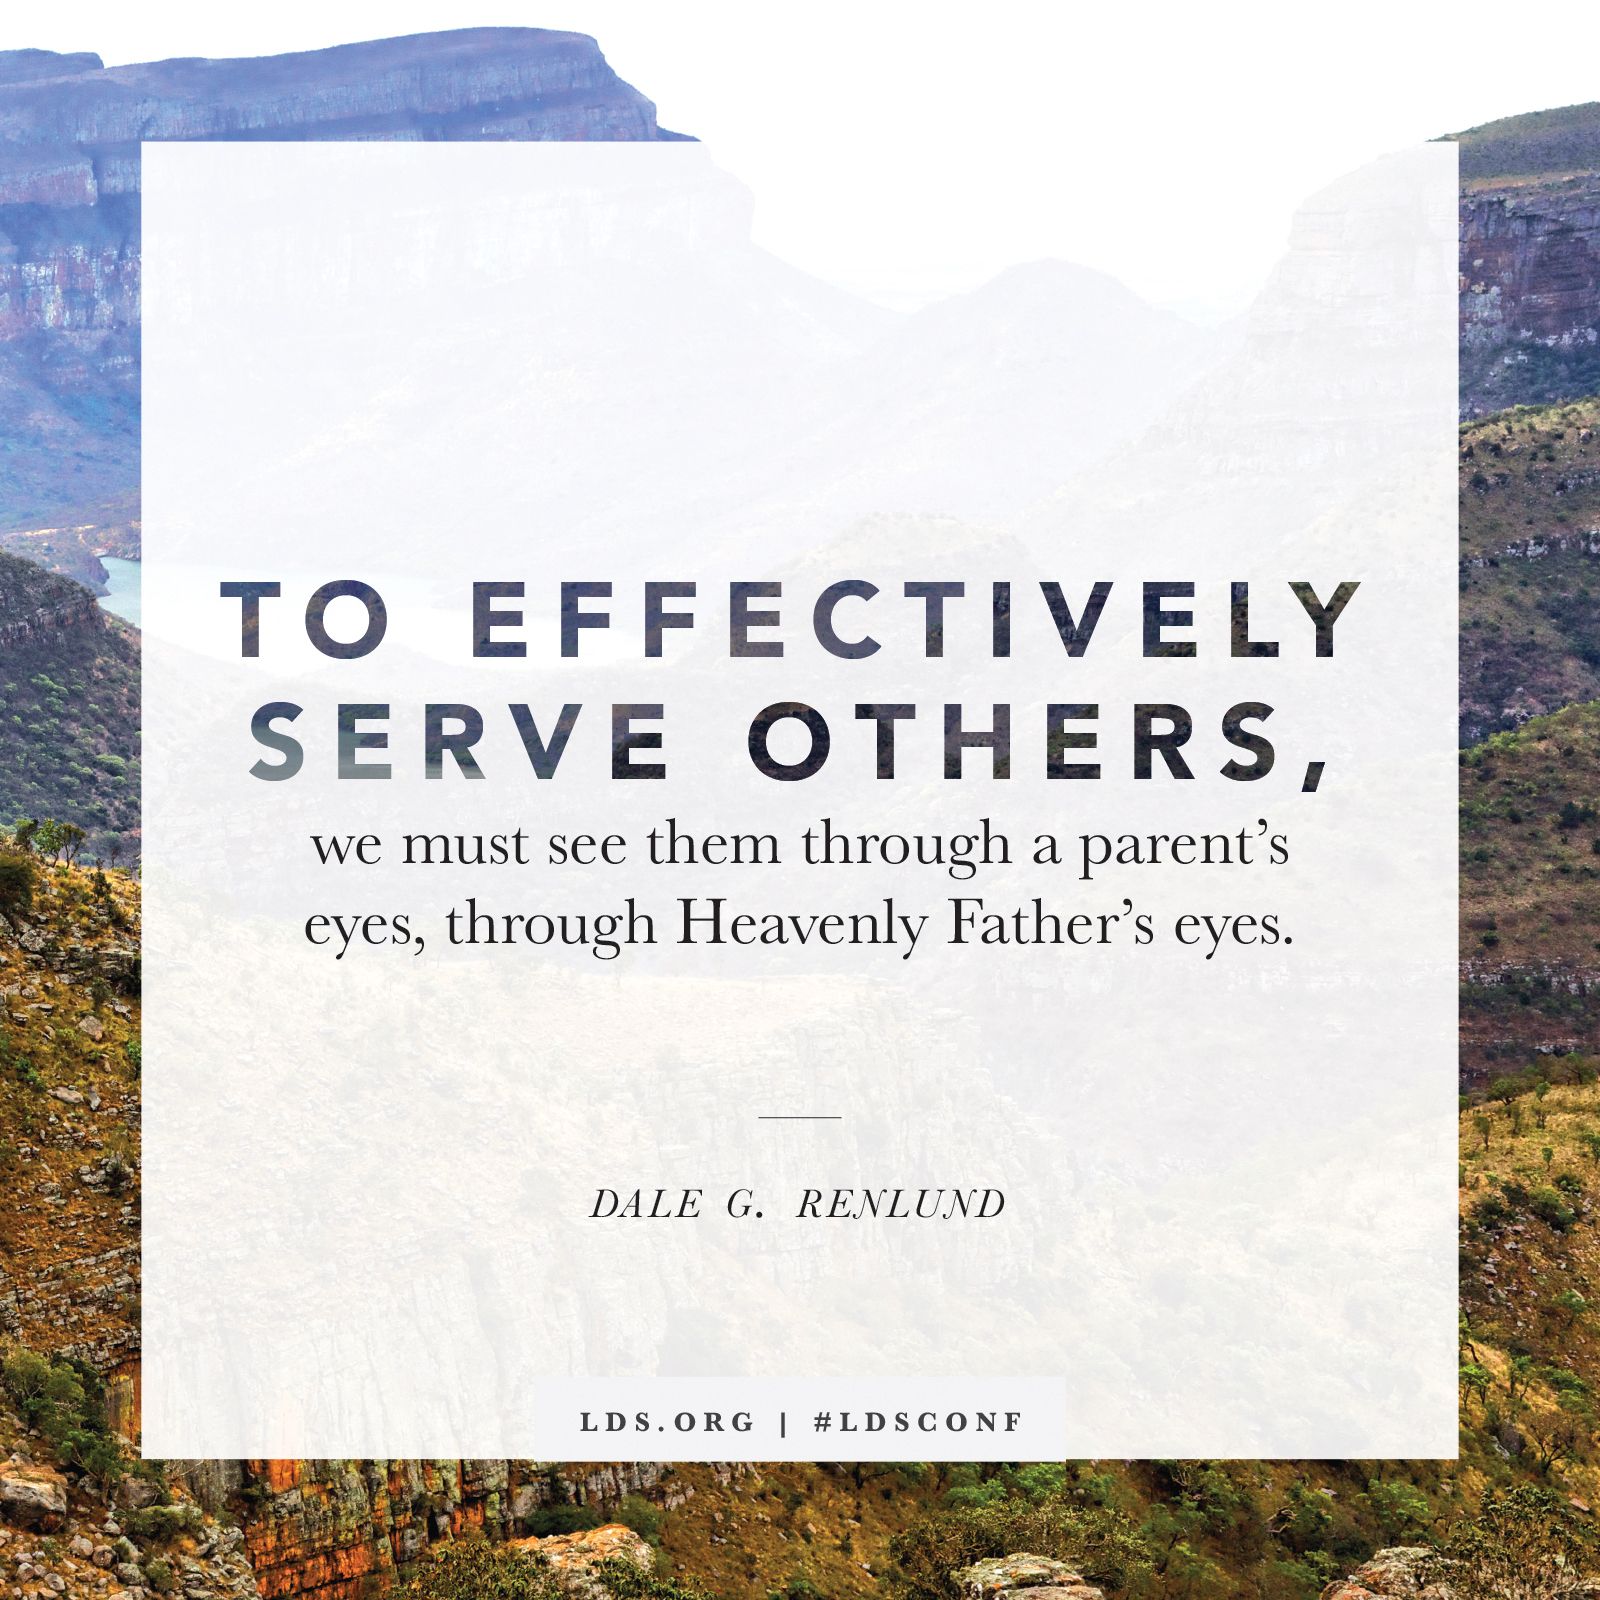 “To effectively serve others, we must see them through a parent’s eyes, through Heavenly Father’s eyes.” —Elder Dale G. Renlund, “Through God’s Eyes”